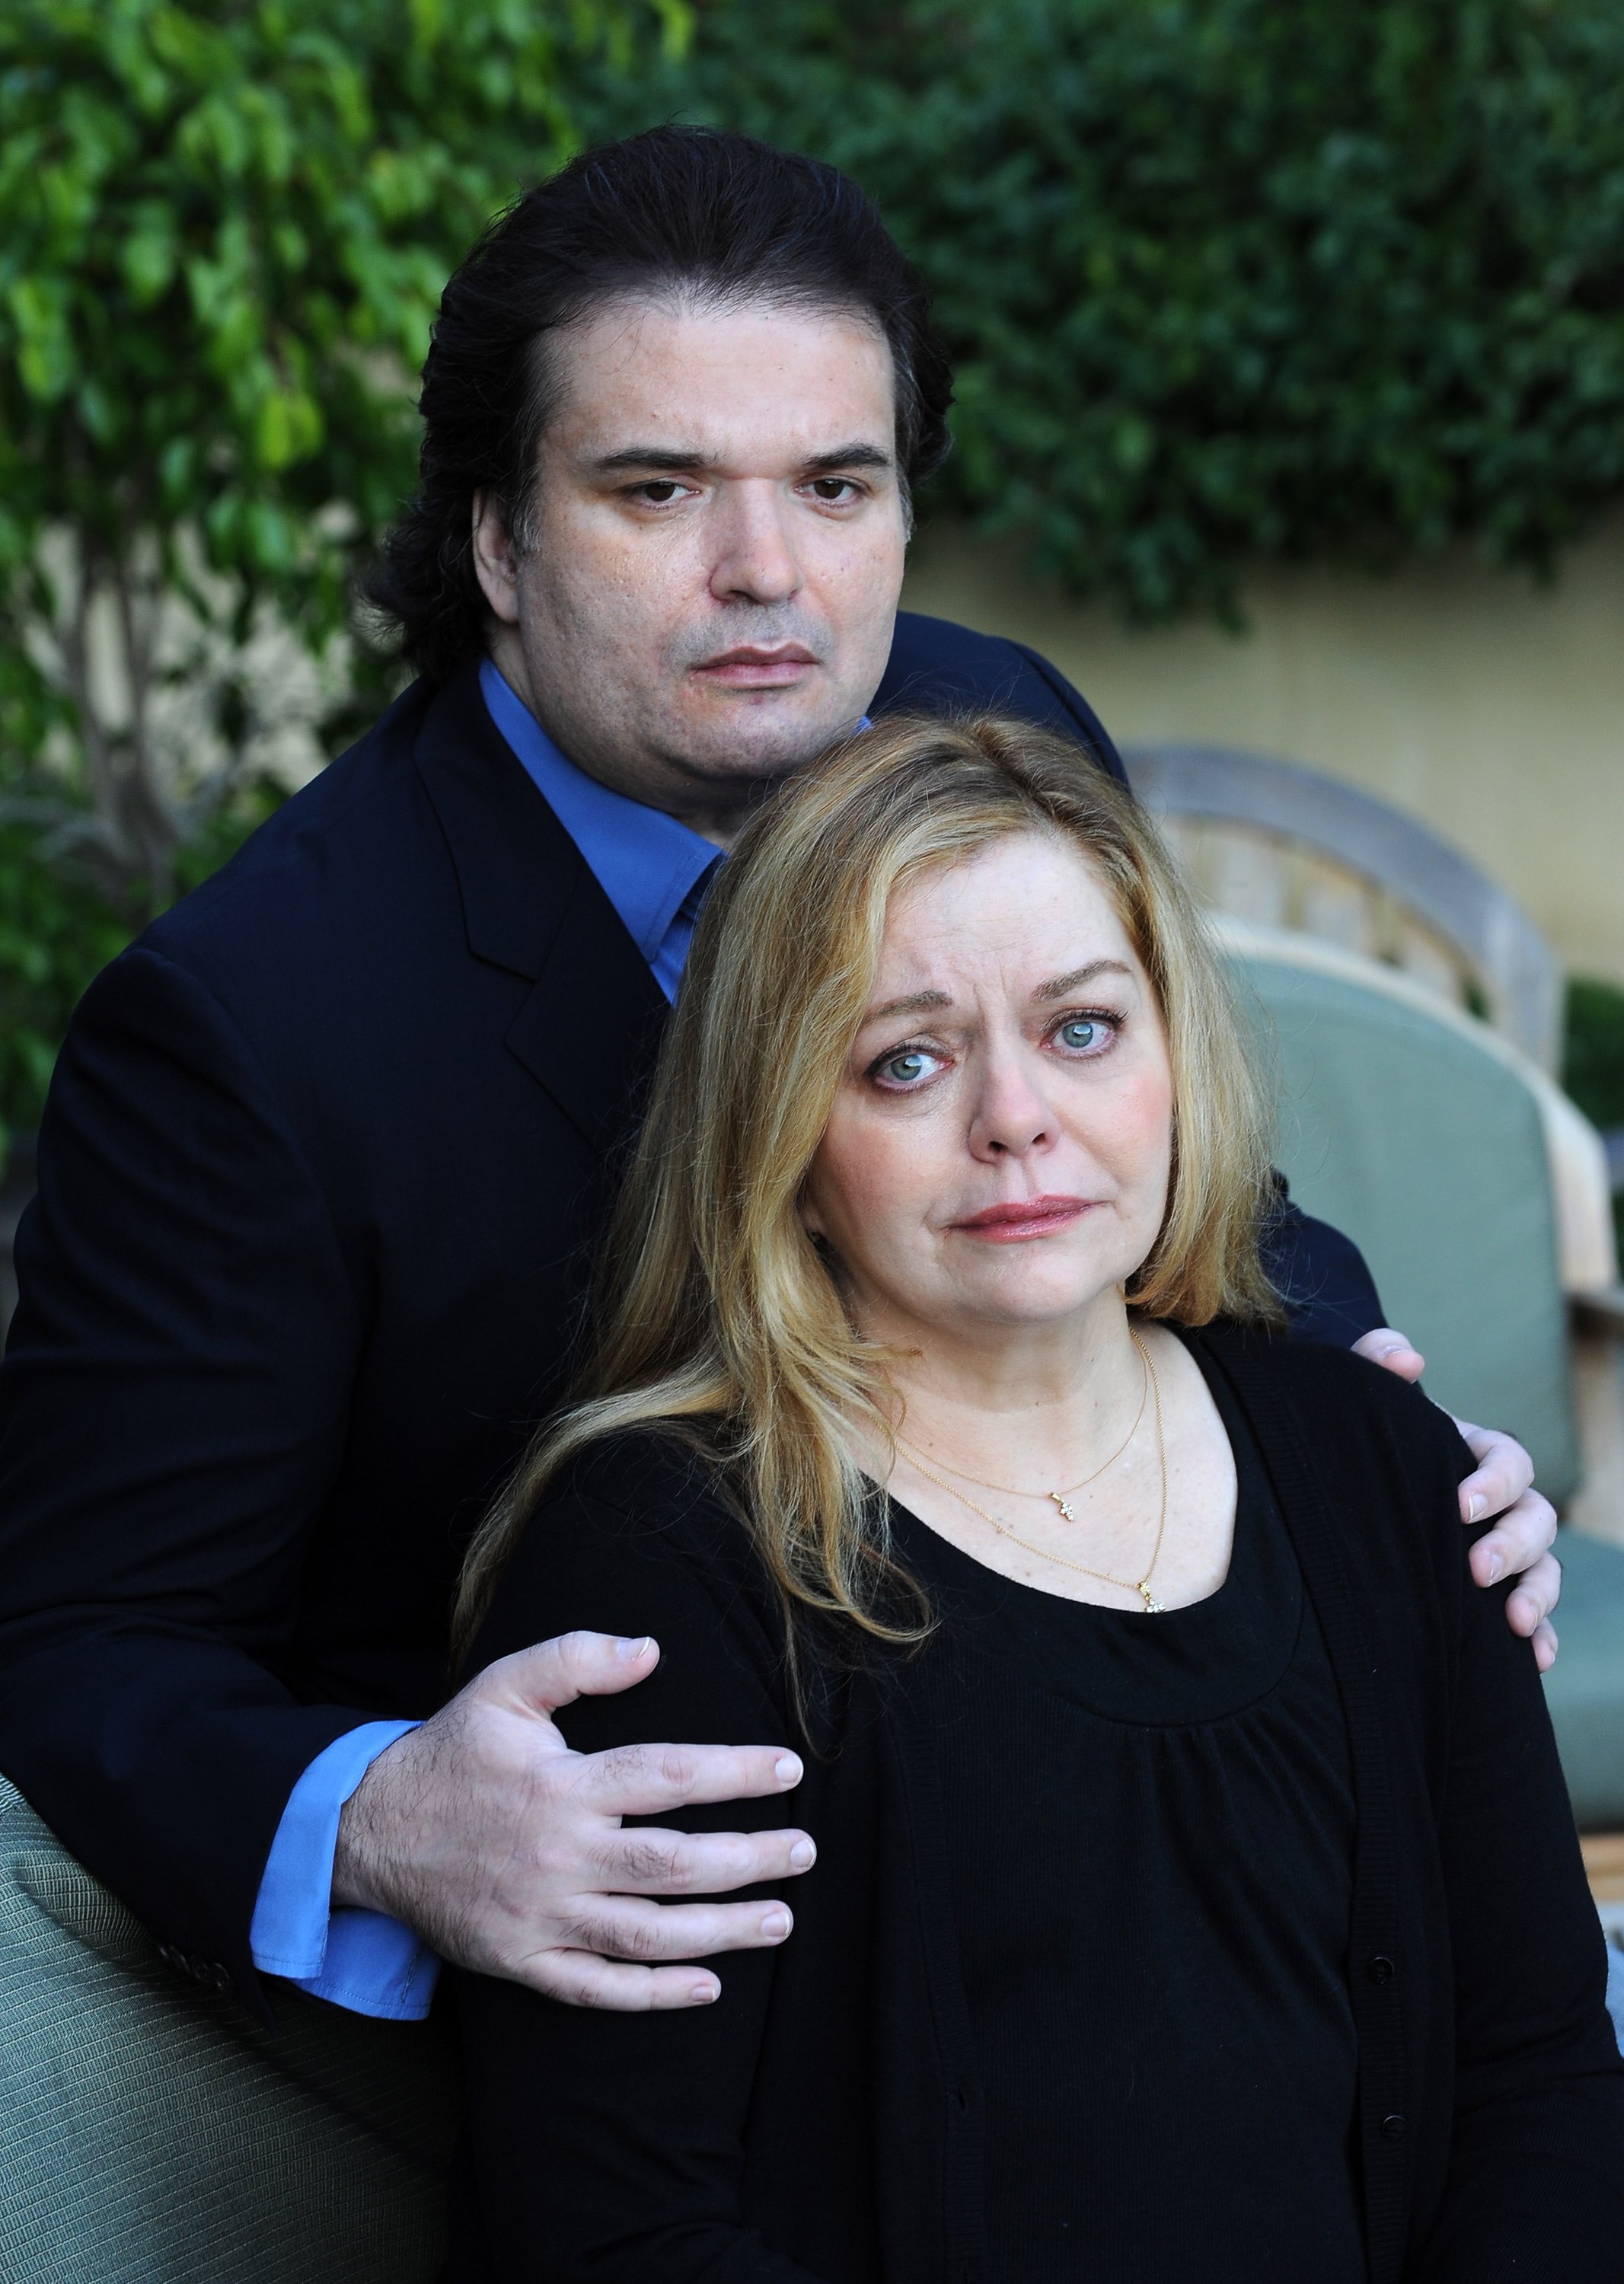 Simon Monjack, husband of deceased actress Brittany Murphy, and Sharon Murphy, mother of Brittany Murphy, during a photo shoot on January 13, 2010 in Hollywood, California. | Source: Getty Images